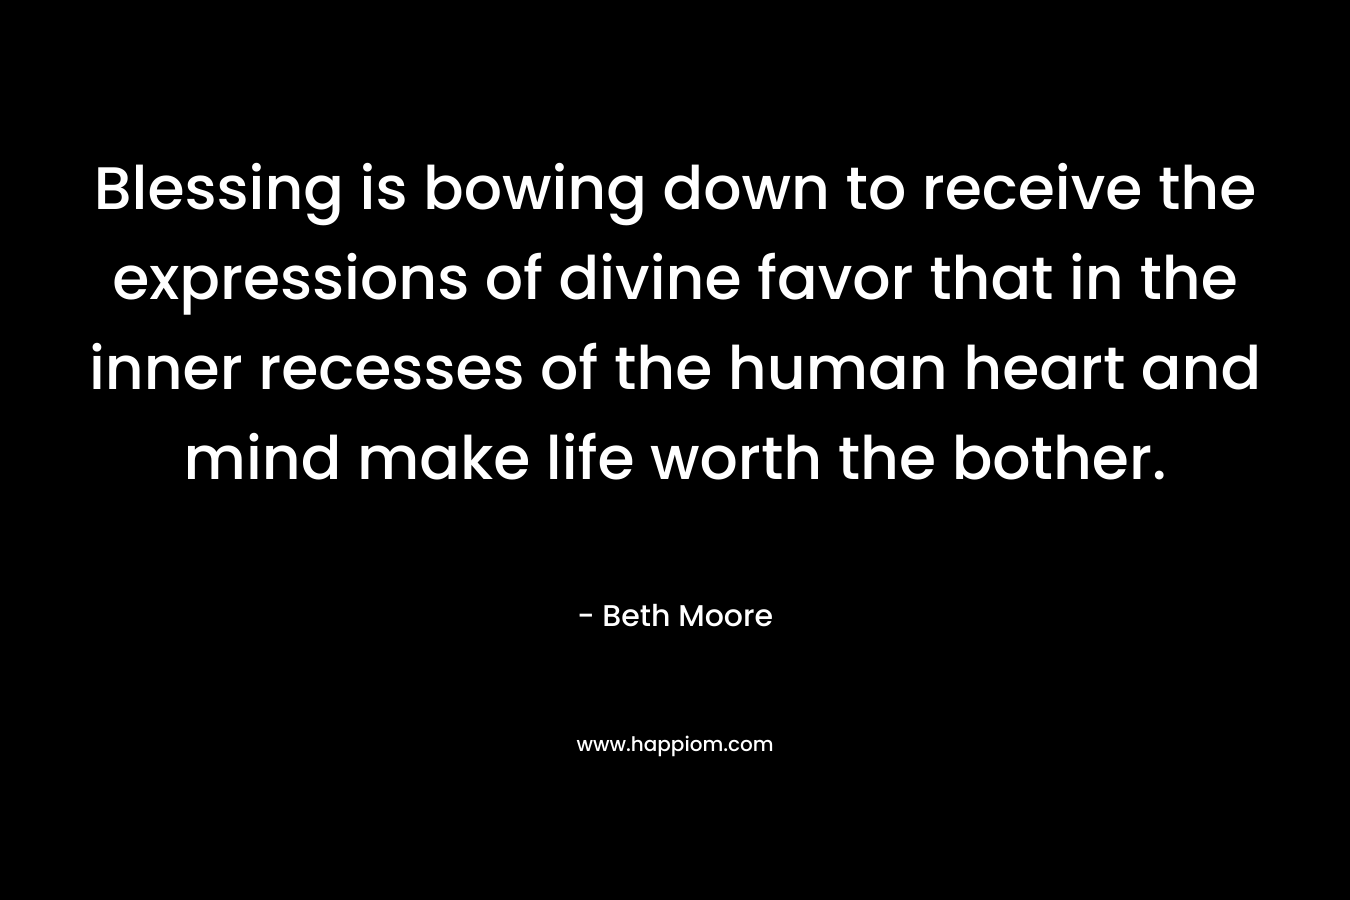 Blessing is bowing down to receive the expressions of divine favor that in the inner recesses of the human heart and mind make life worth the bother.